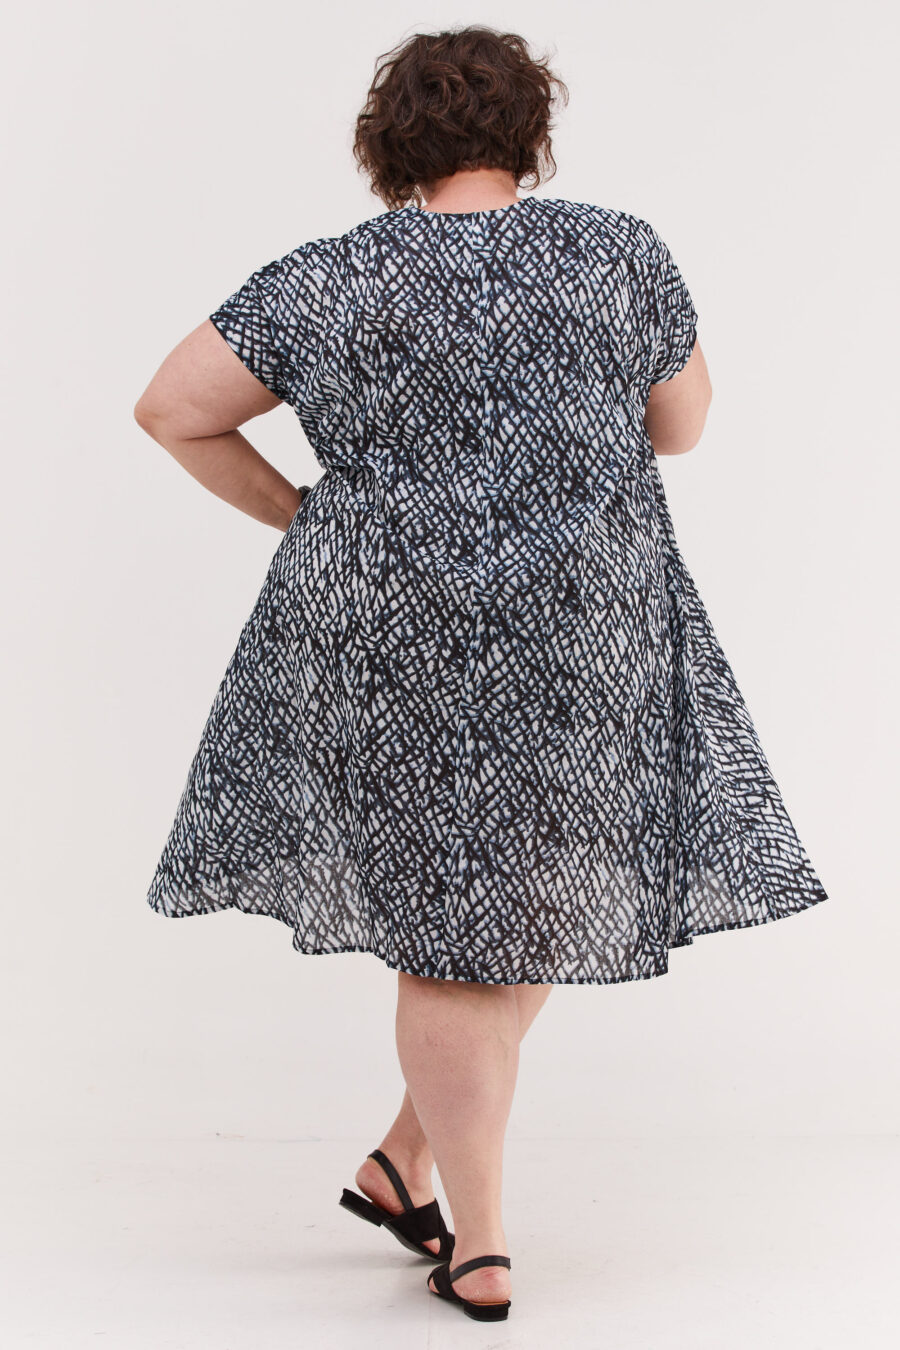 Joes dress | Uniquely designed midi oversize dress - Black crush print, white dress with black and light blue mesh print by comfort zone boutique